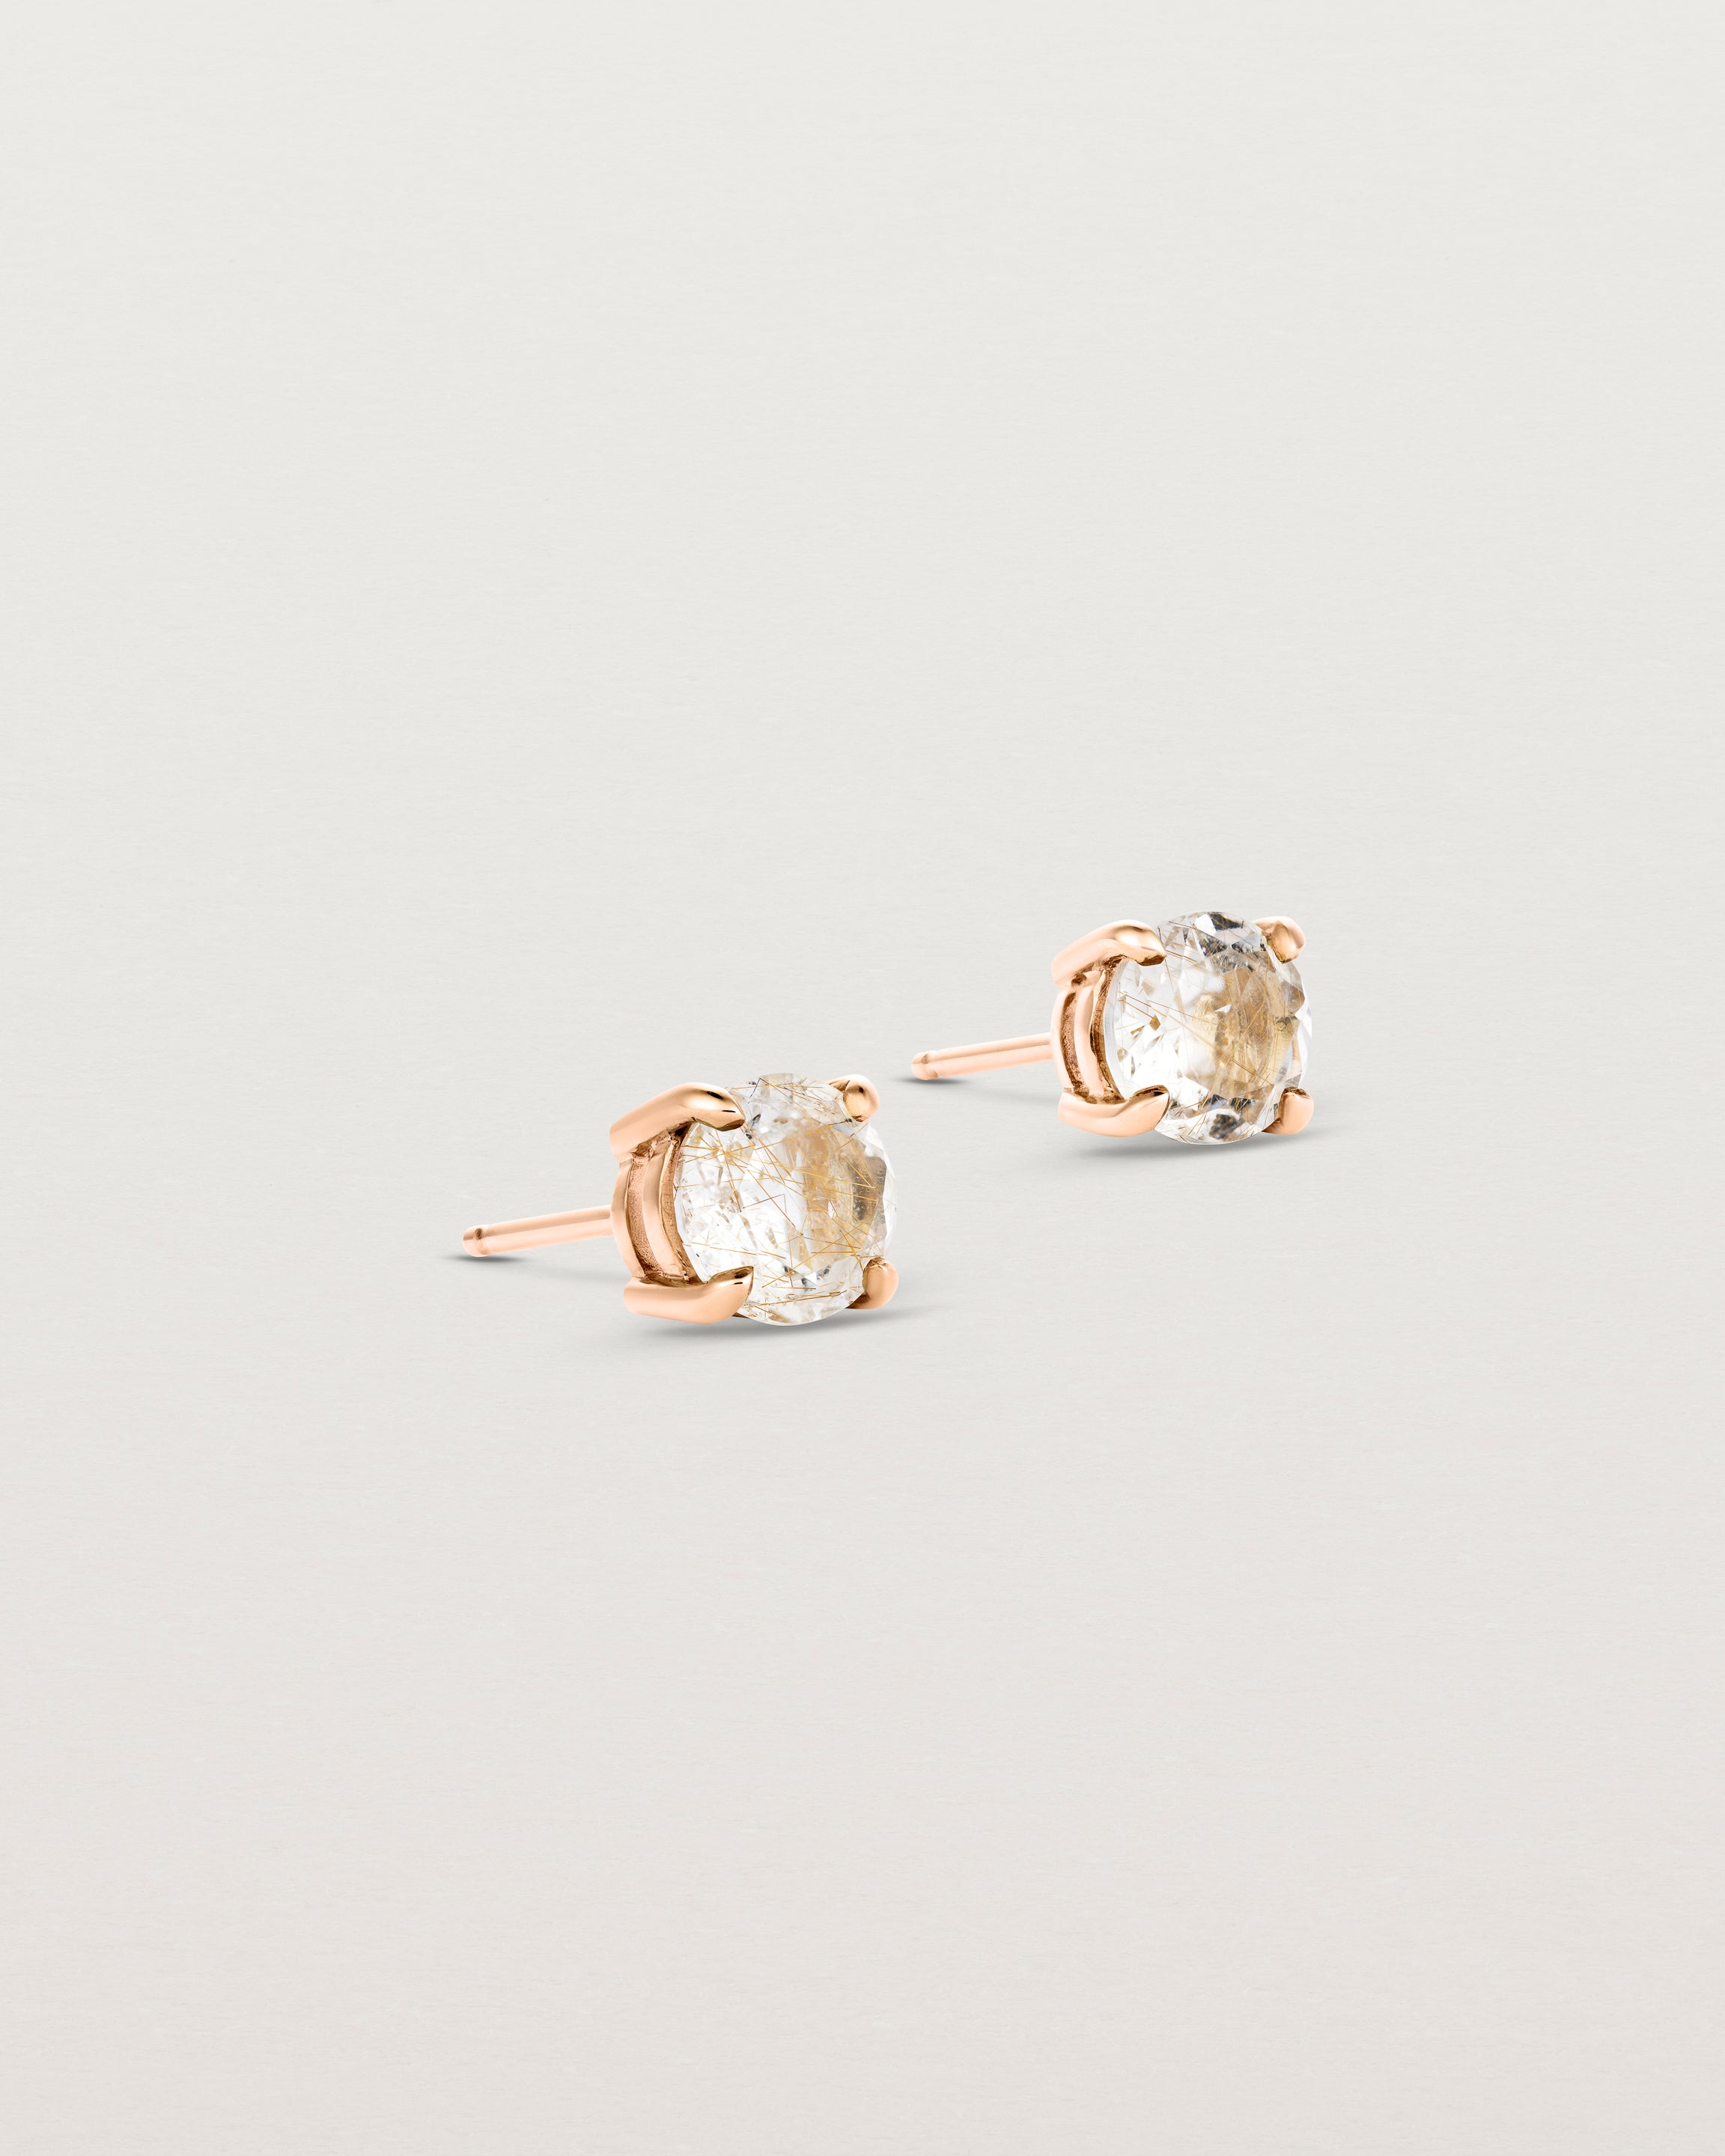 A pair of rose gold studs featuring a round cut light yellow rutilated quartz stone